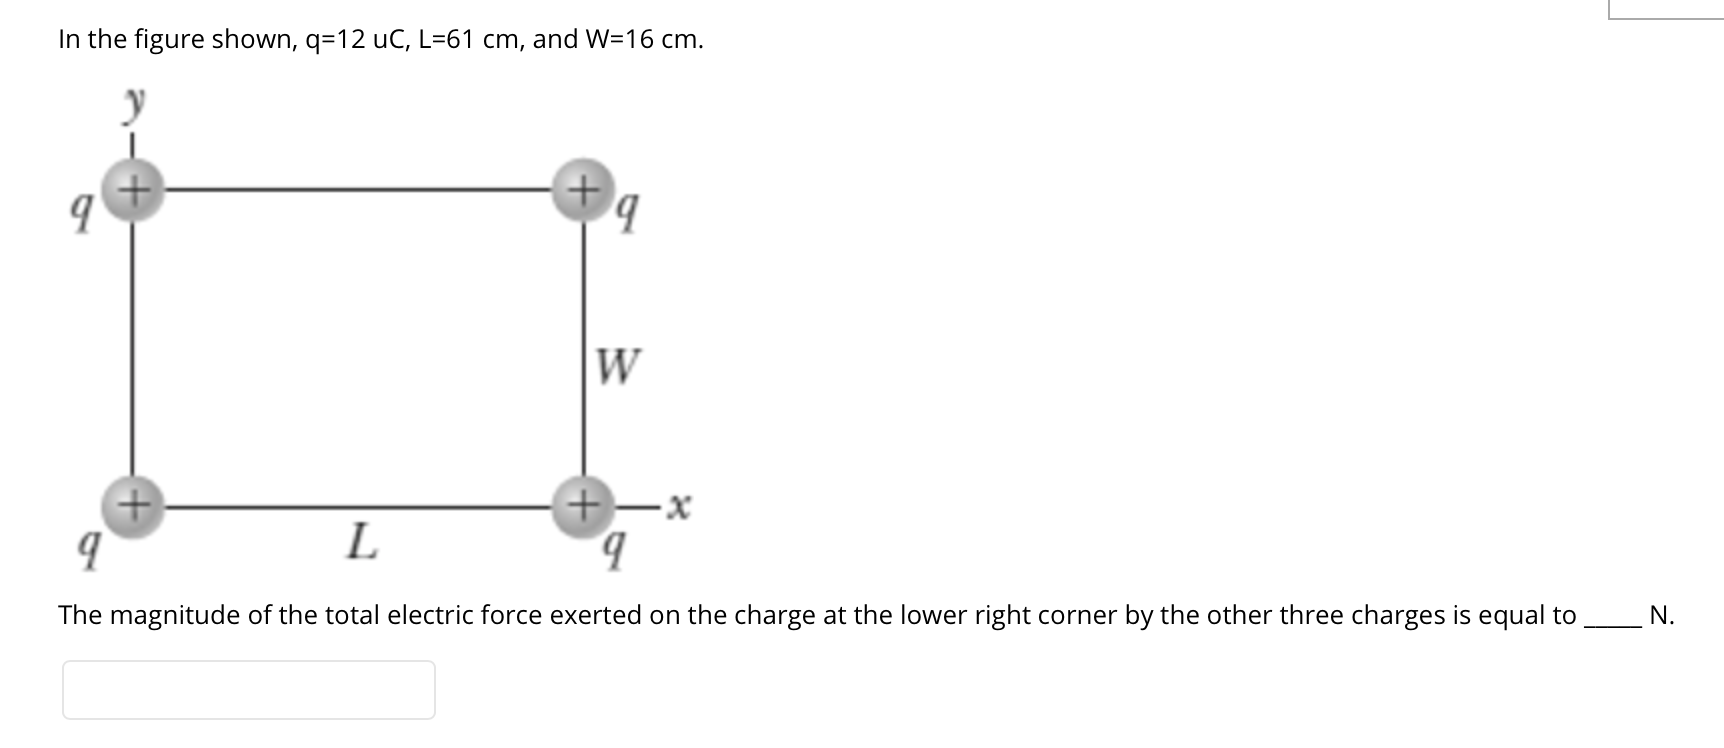 In the figure shown, q=12 uC, L=61 cm, and W=16 cm.
W
+)
+-x
b.
L
The magnitude of the total electric force exerted on the charge at the lower right corner by the other three charges is equal to
N.
